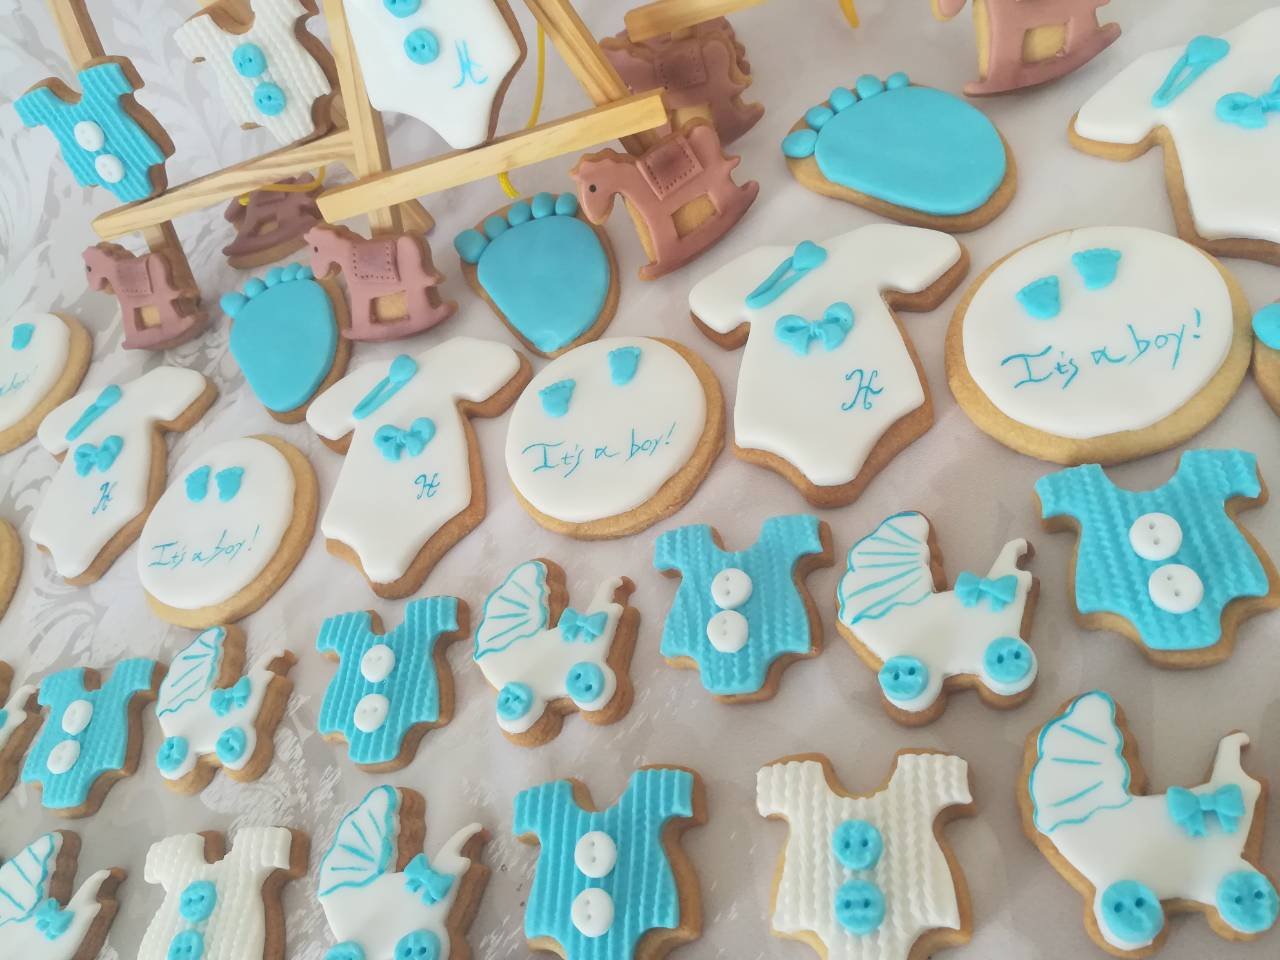 baby shower party it's a boy! αγόρι με cookies από ζαχαρόπαστα, ζαχαροπλαστείο κοντά μου καλαμάτα madamecharlotte.gr, birth theme cookies and partycakes 2d 3d confectionery patisserie kalamata